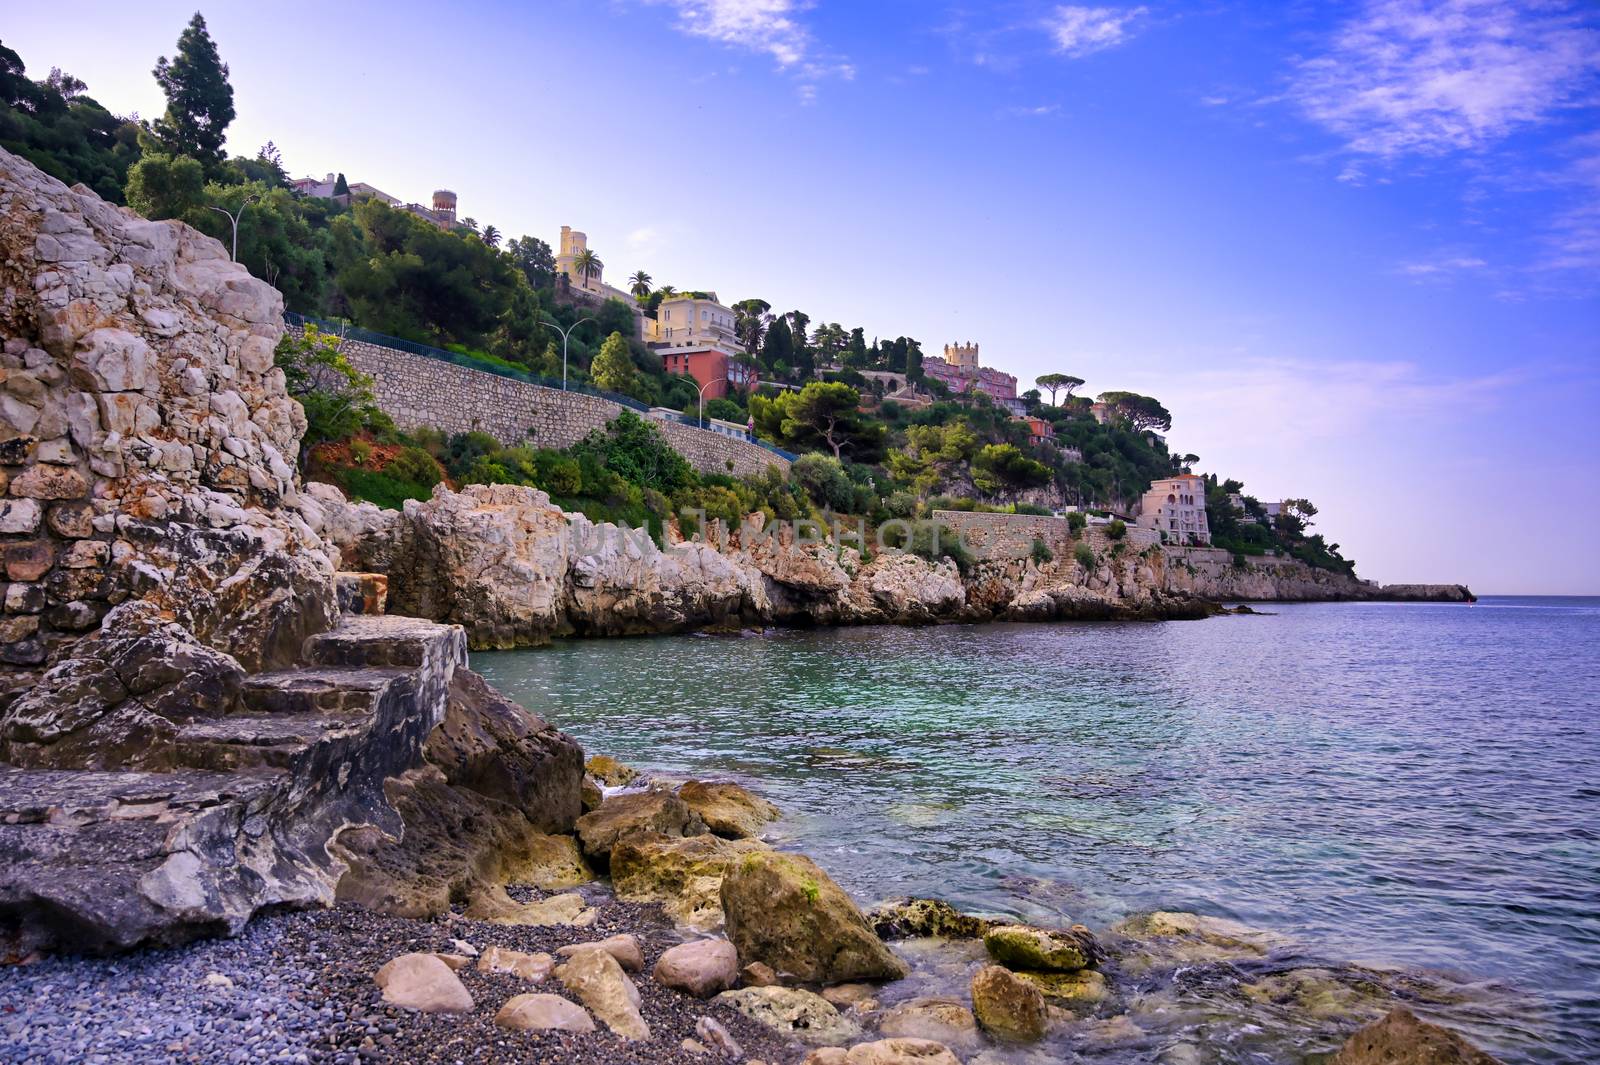 The coastline on the Mediterranean Sea at Nice, France along the French Riviera.